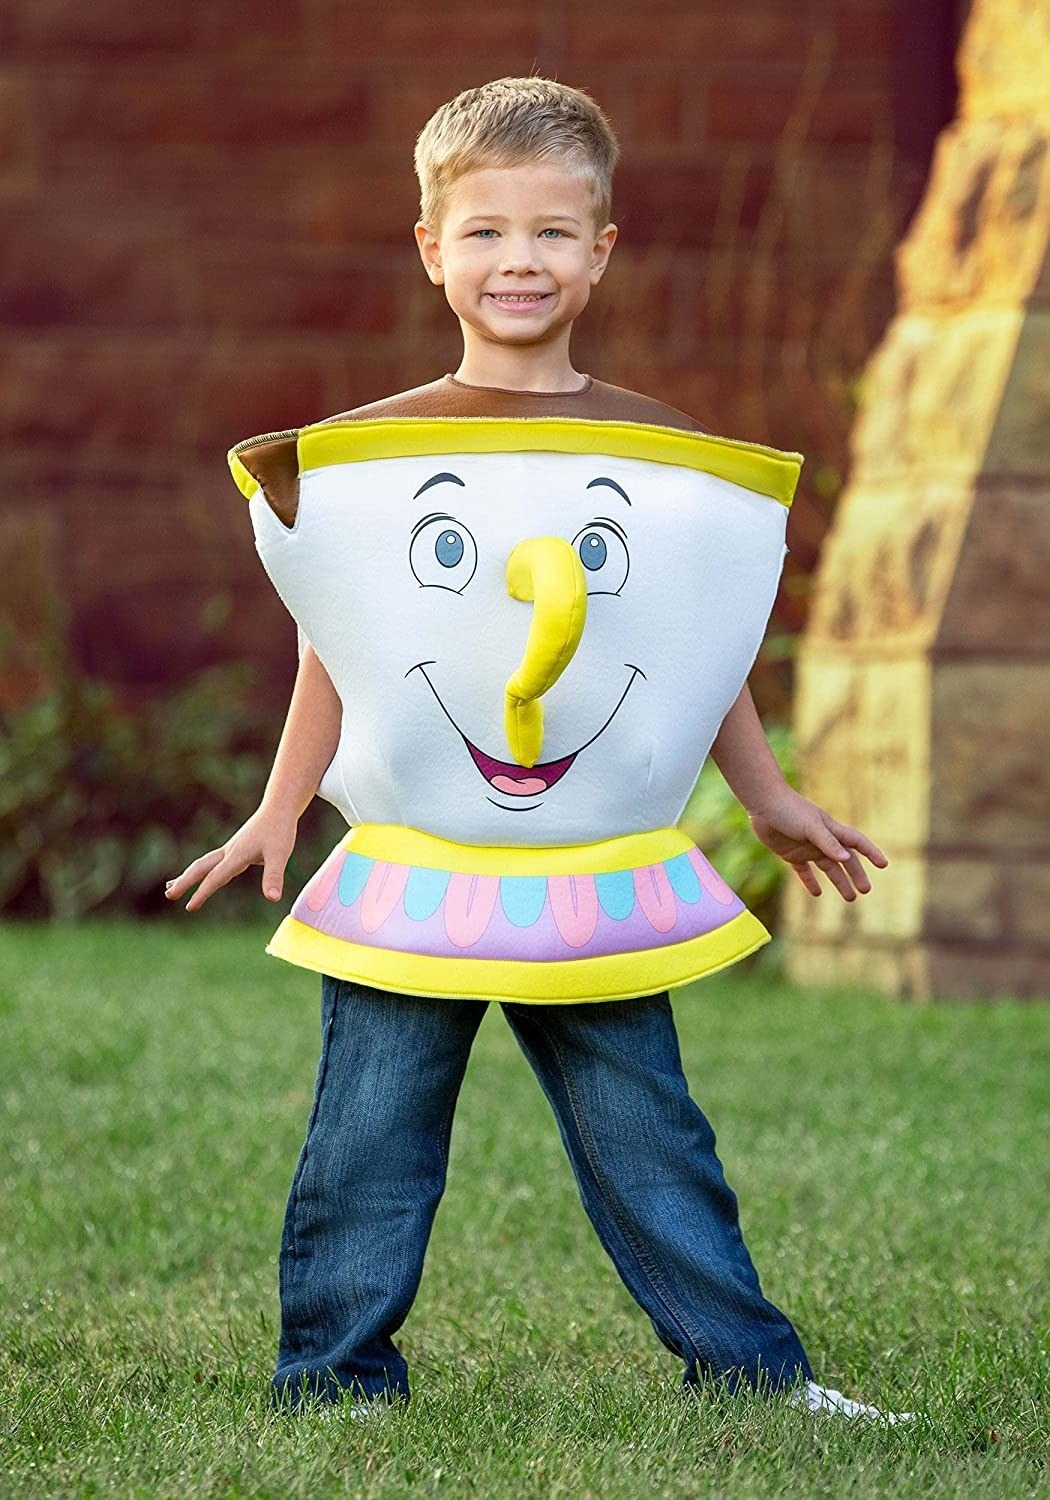 a child wearing a costume that looks like chip the teacup from beauty and the beast